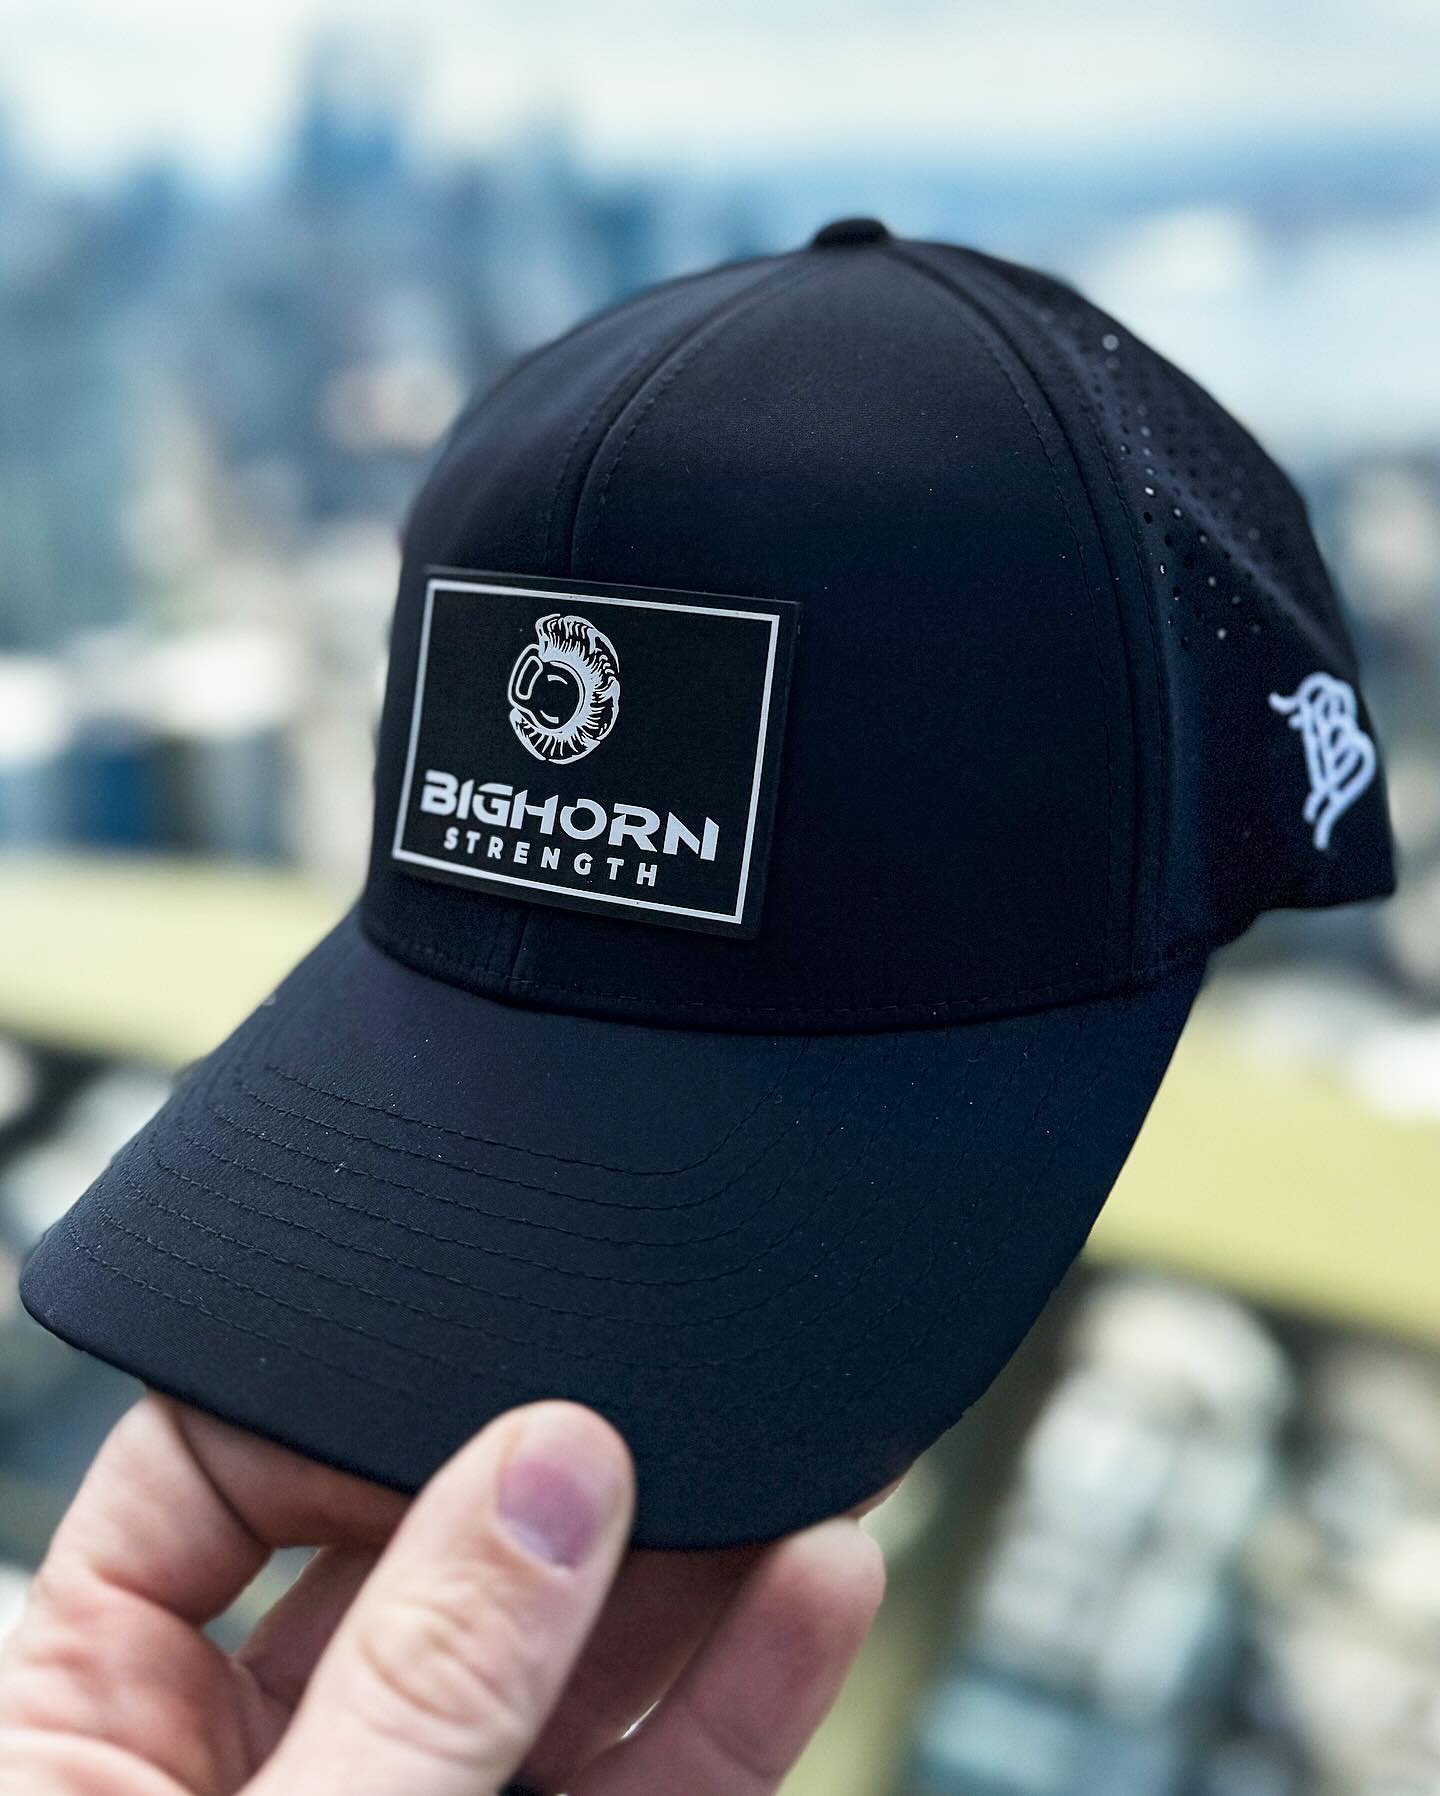 NEW Bighorn Performance Hats by @brandedbills are now available at &hellip; www.bighornstrength.com! 

These hats are lightweight, waterproof and have a flex fit capability for a comfortable fit at the gym or outdoors. 

#bighorn #strength #training 